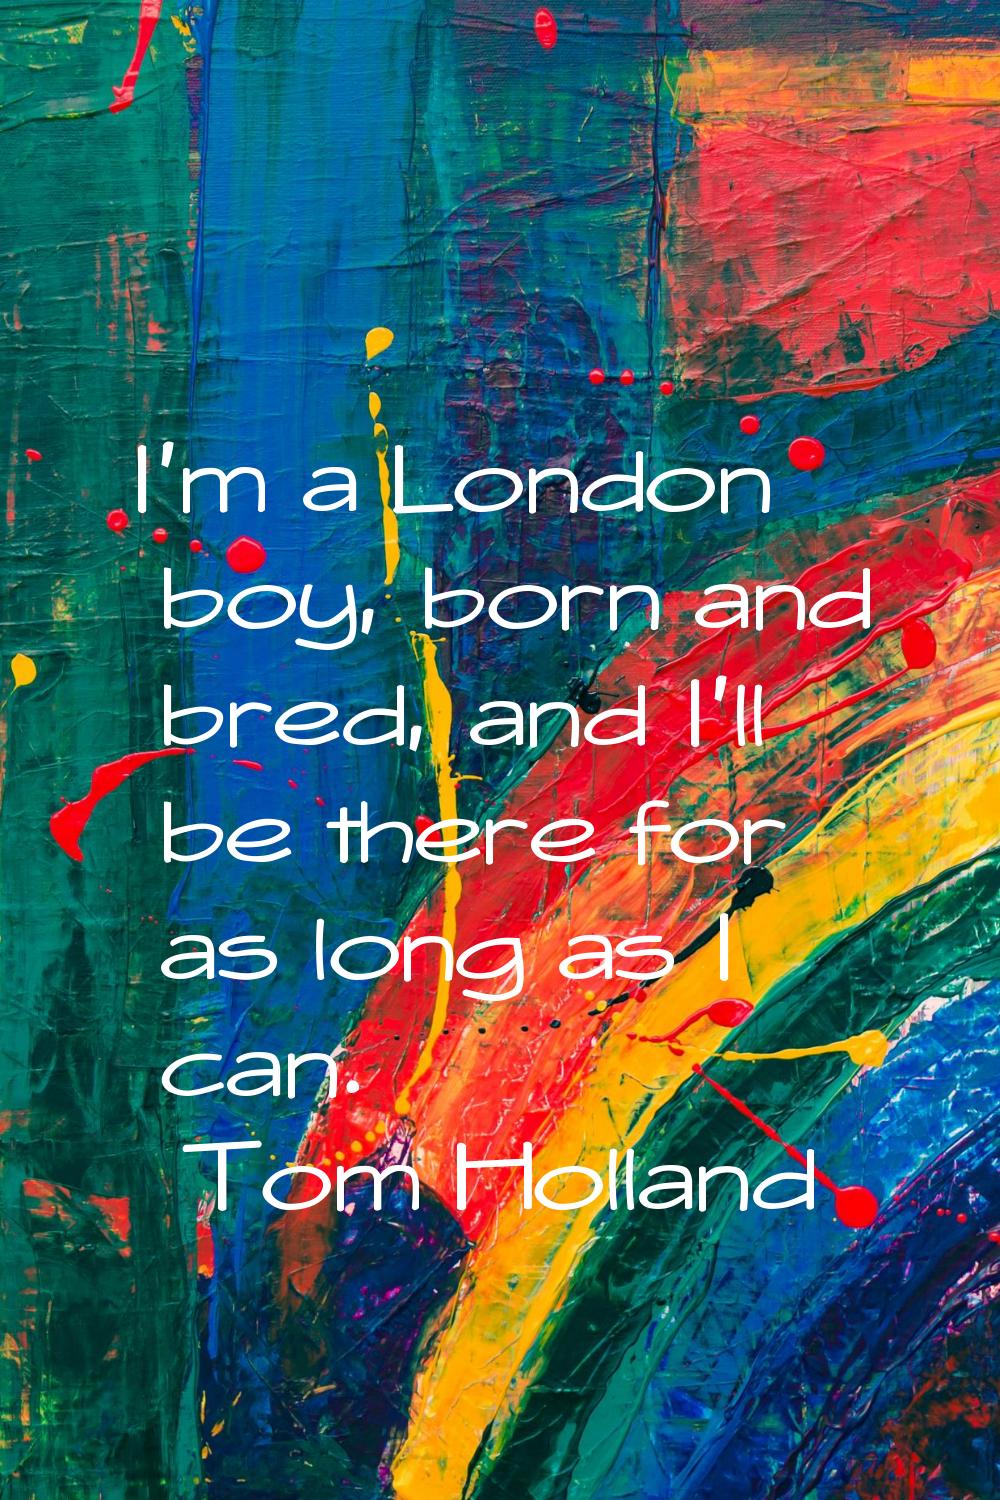 I'm a London boy, born and bred, and I'll be there for as long as I can.